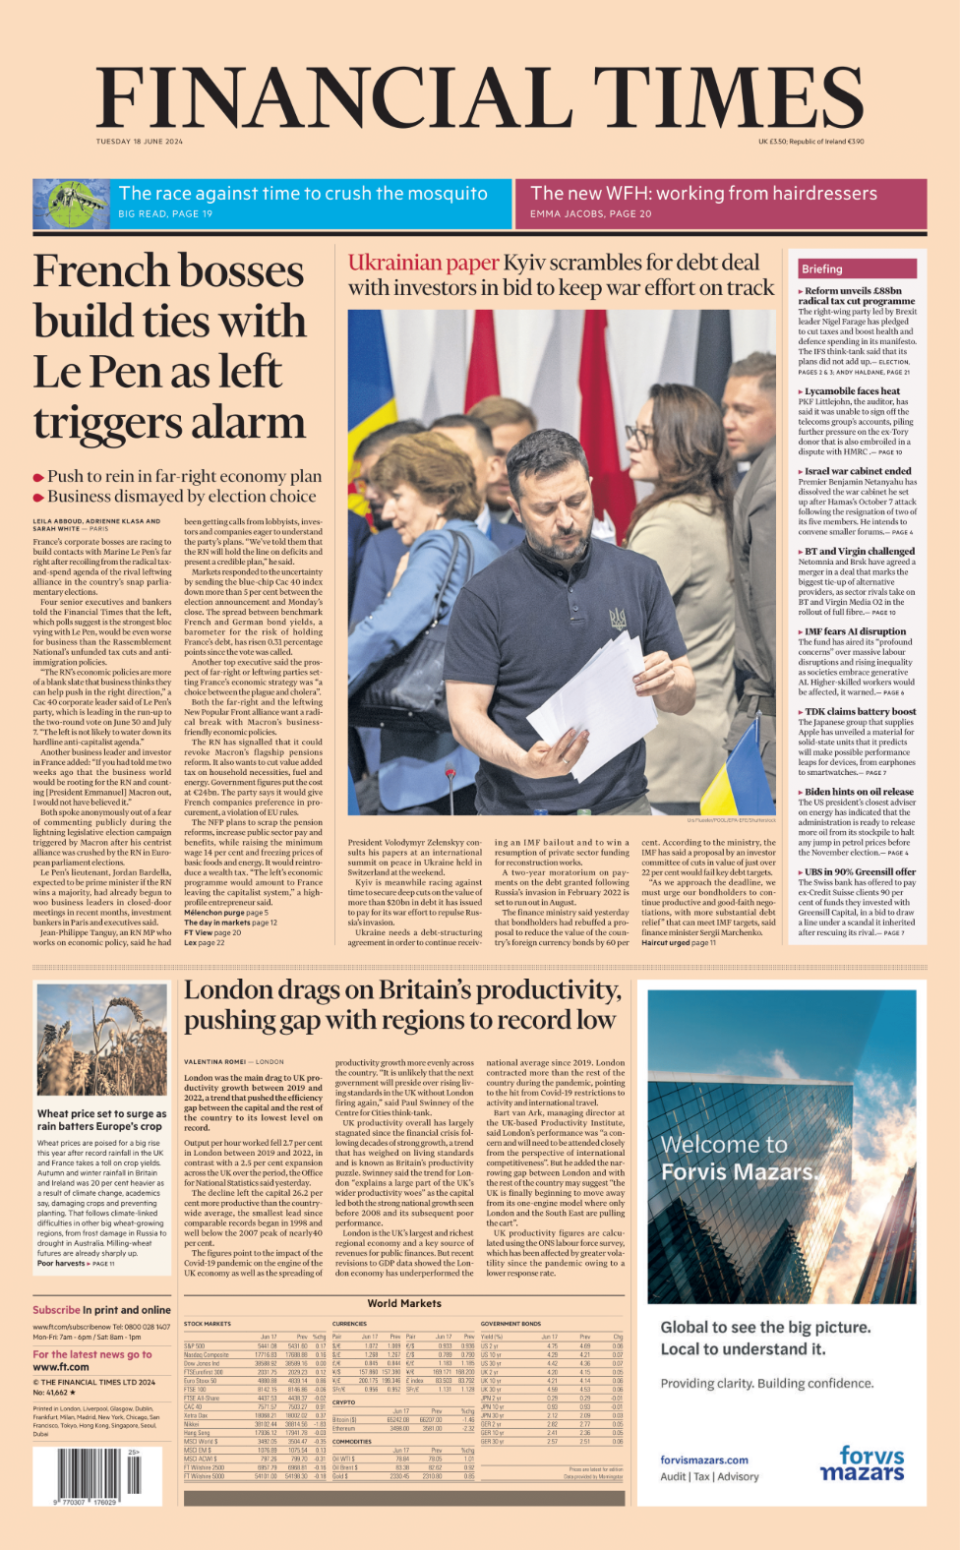 The front page of the Financial Times, where the top stories are about the French election and Ukraine attempting to get a debt deal to keep it war effort on track